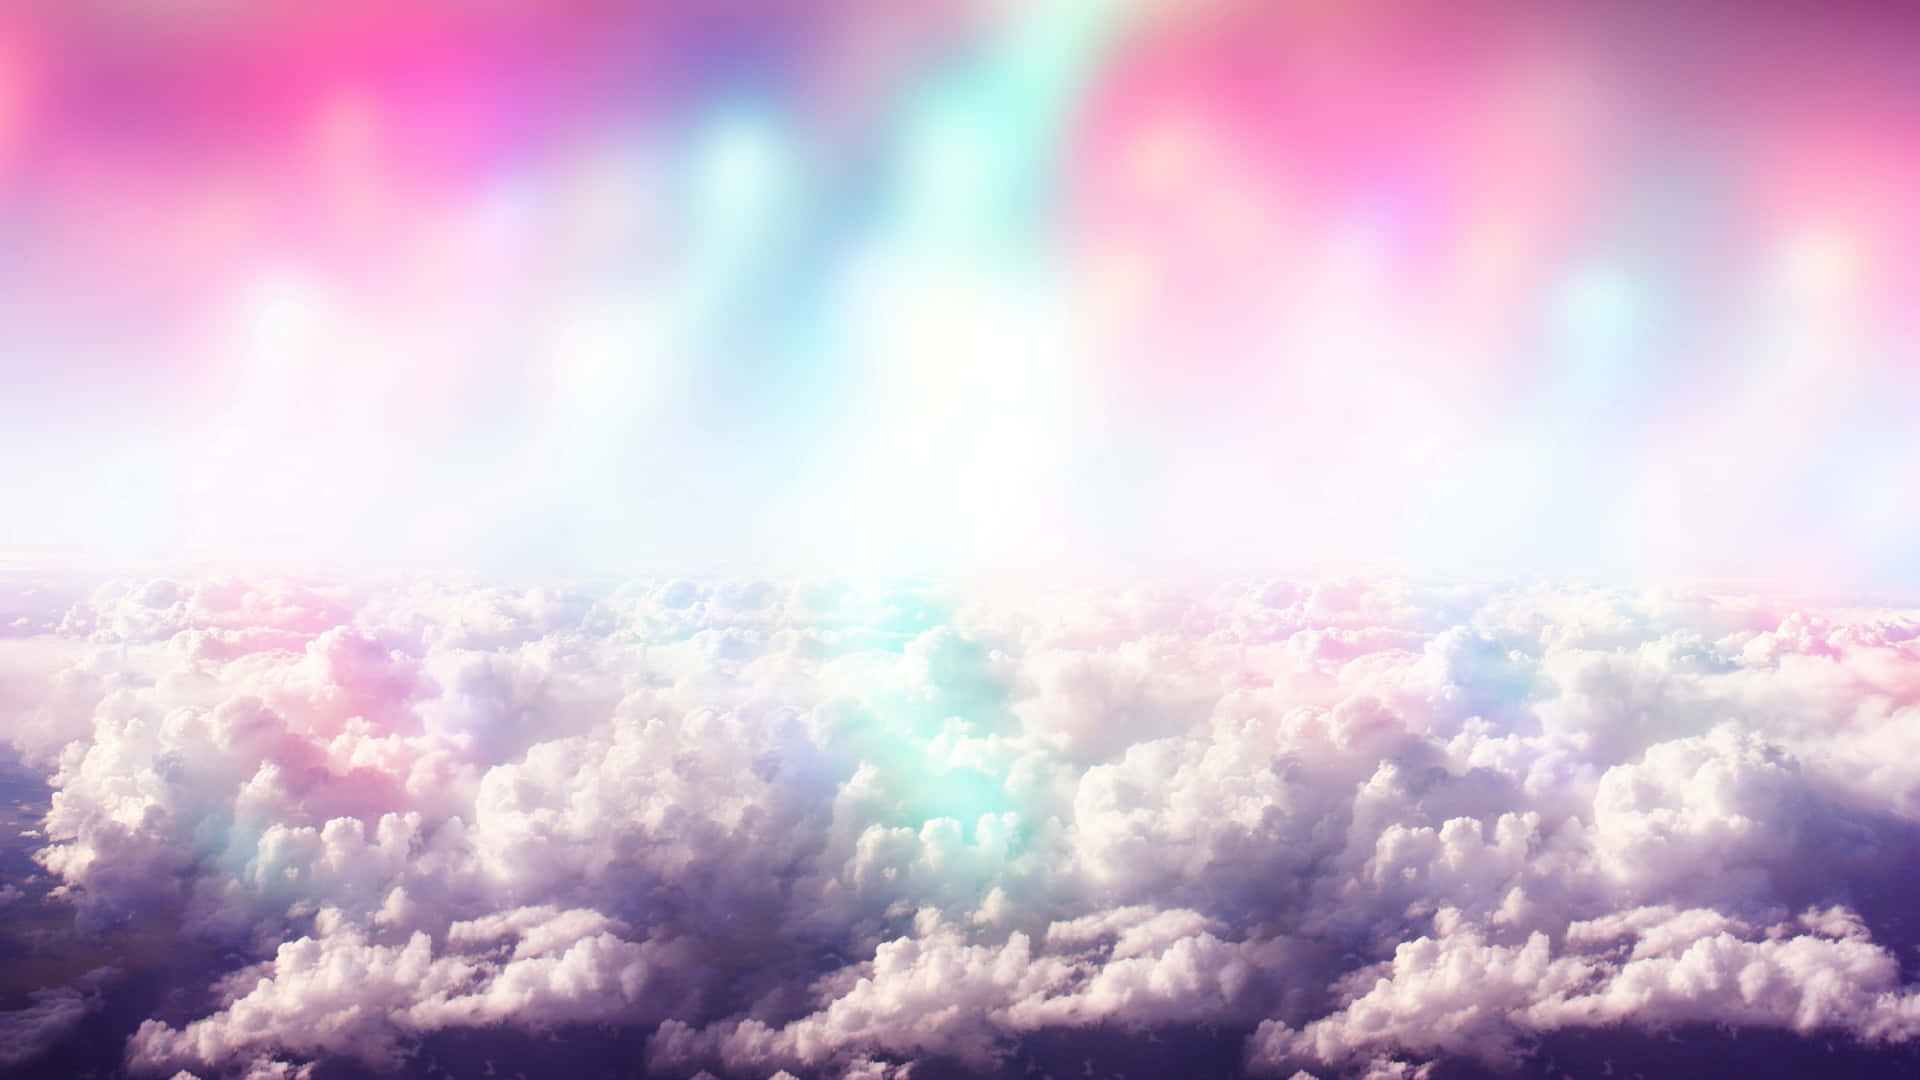 Mesmerizing Trippy Sky with Dreamy Clouds and Vibrant Colors Wallpaper